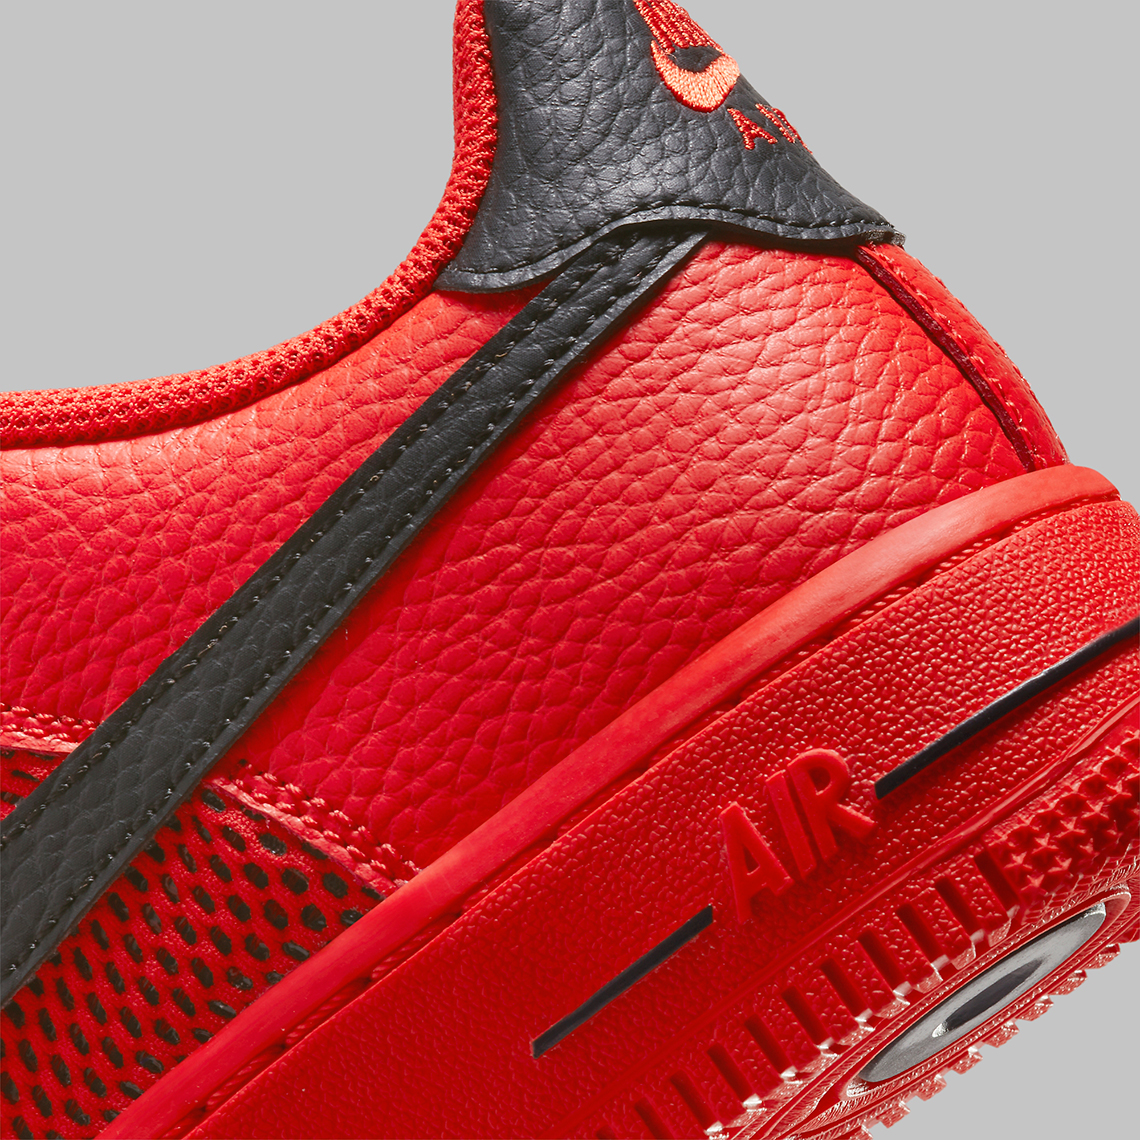 Nike Air Force 1 Low Gs Mesh Red Black Dh9596 600 4